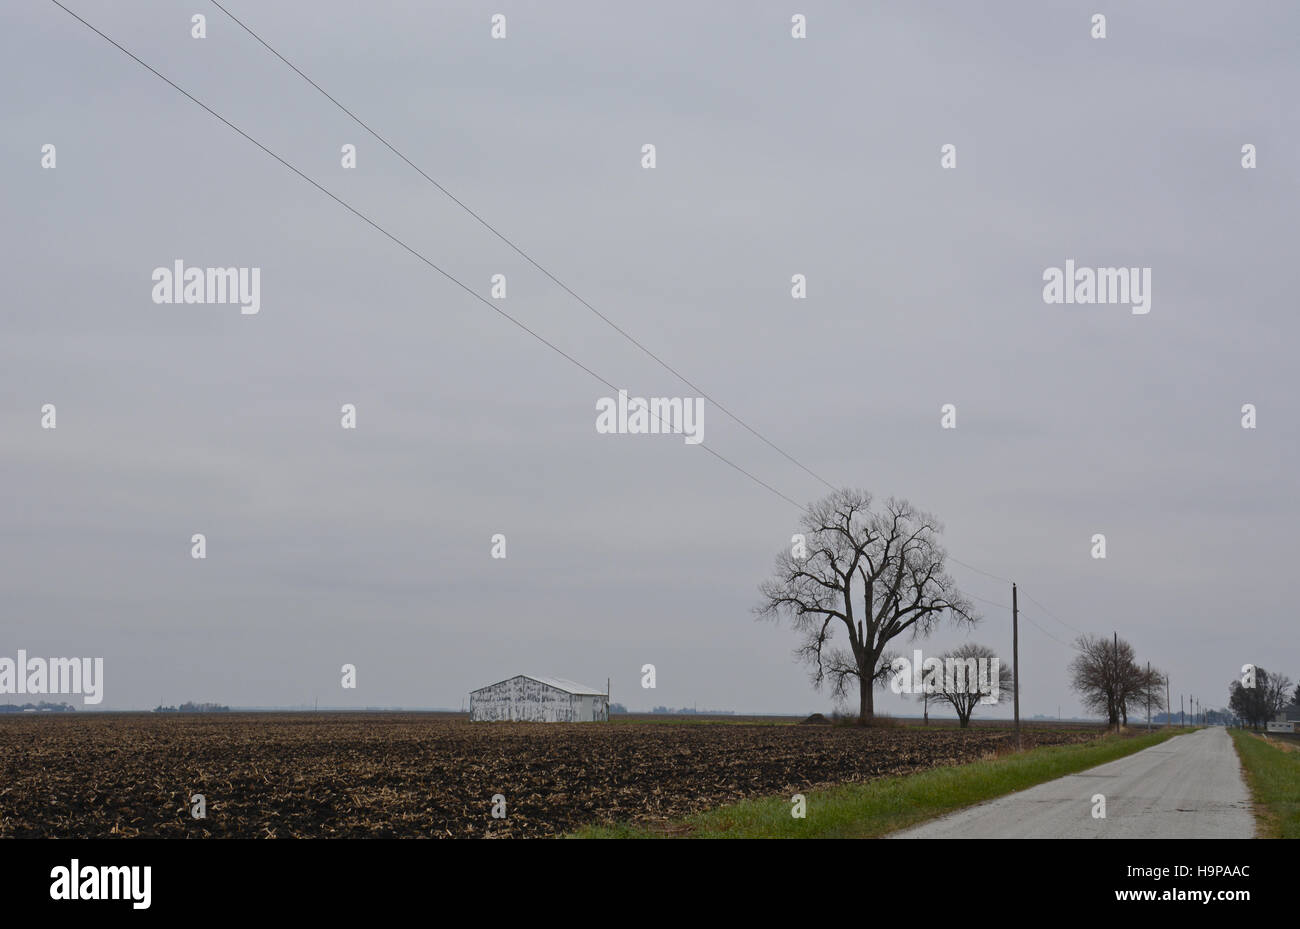 A rural road leads off into the distance under cold gray November skies in the Midwestern United States farm country. Stock Photo